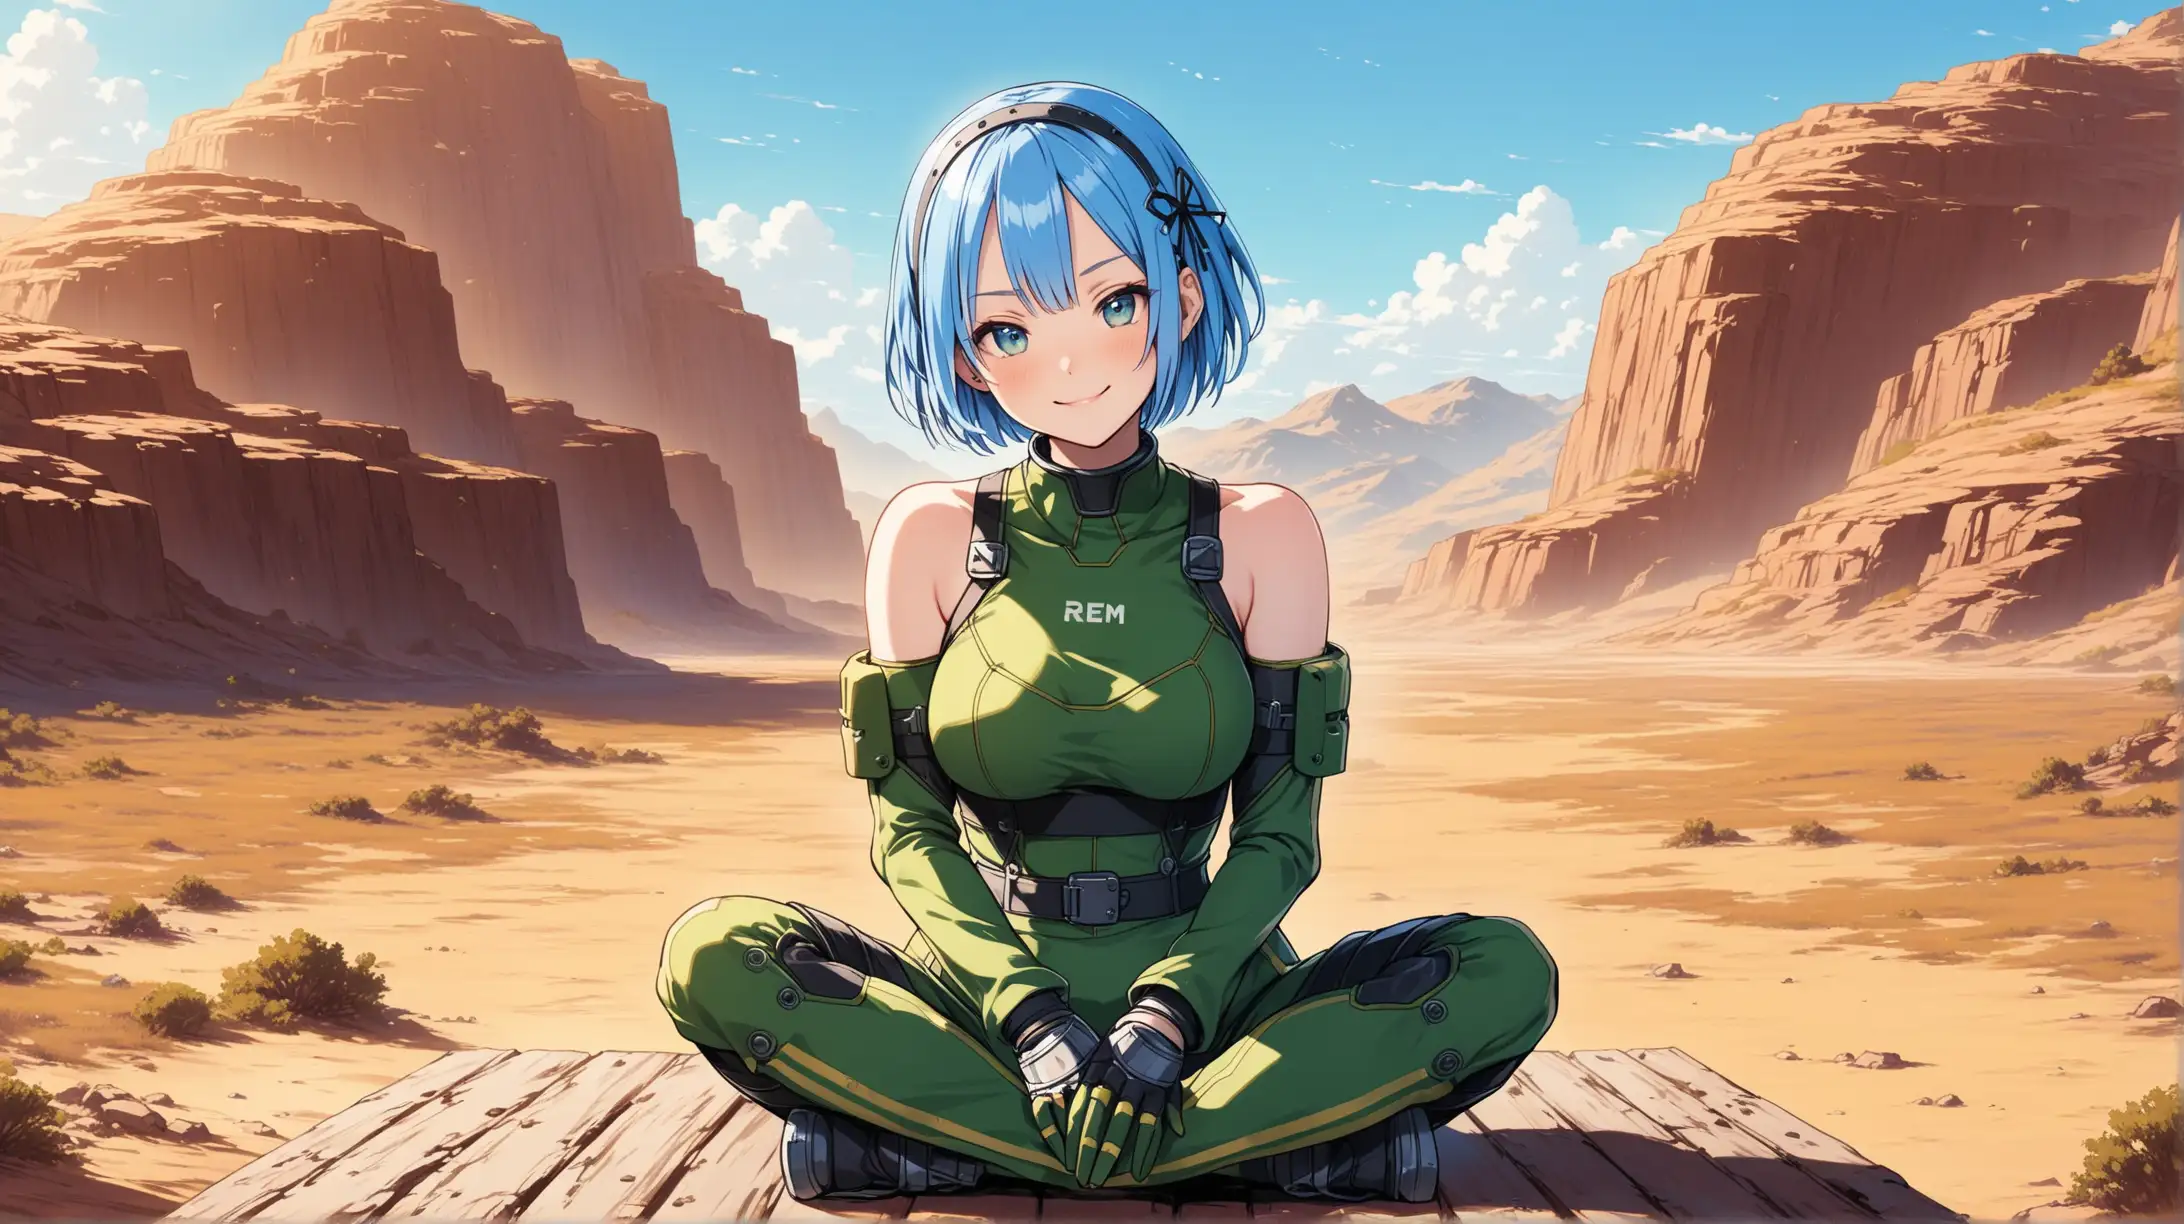 Draw the character Rem, high quality, in a relaxed pose, outdoors, on a sunny day, wearing an outfit inspired from the Fallout series, smiling at the viewer